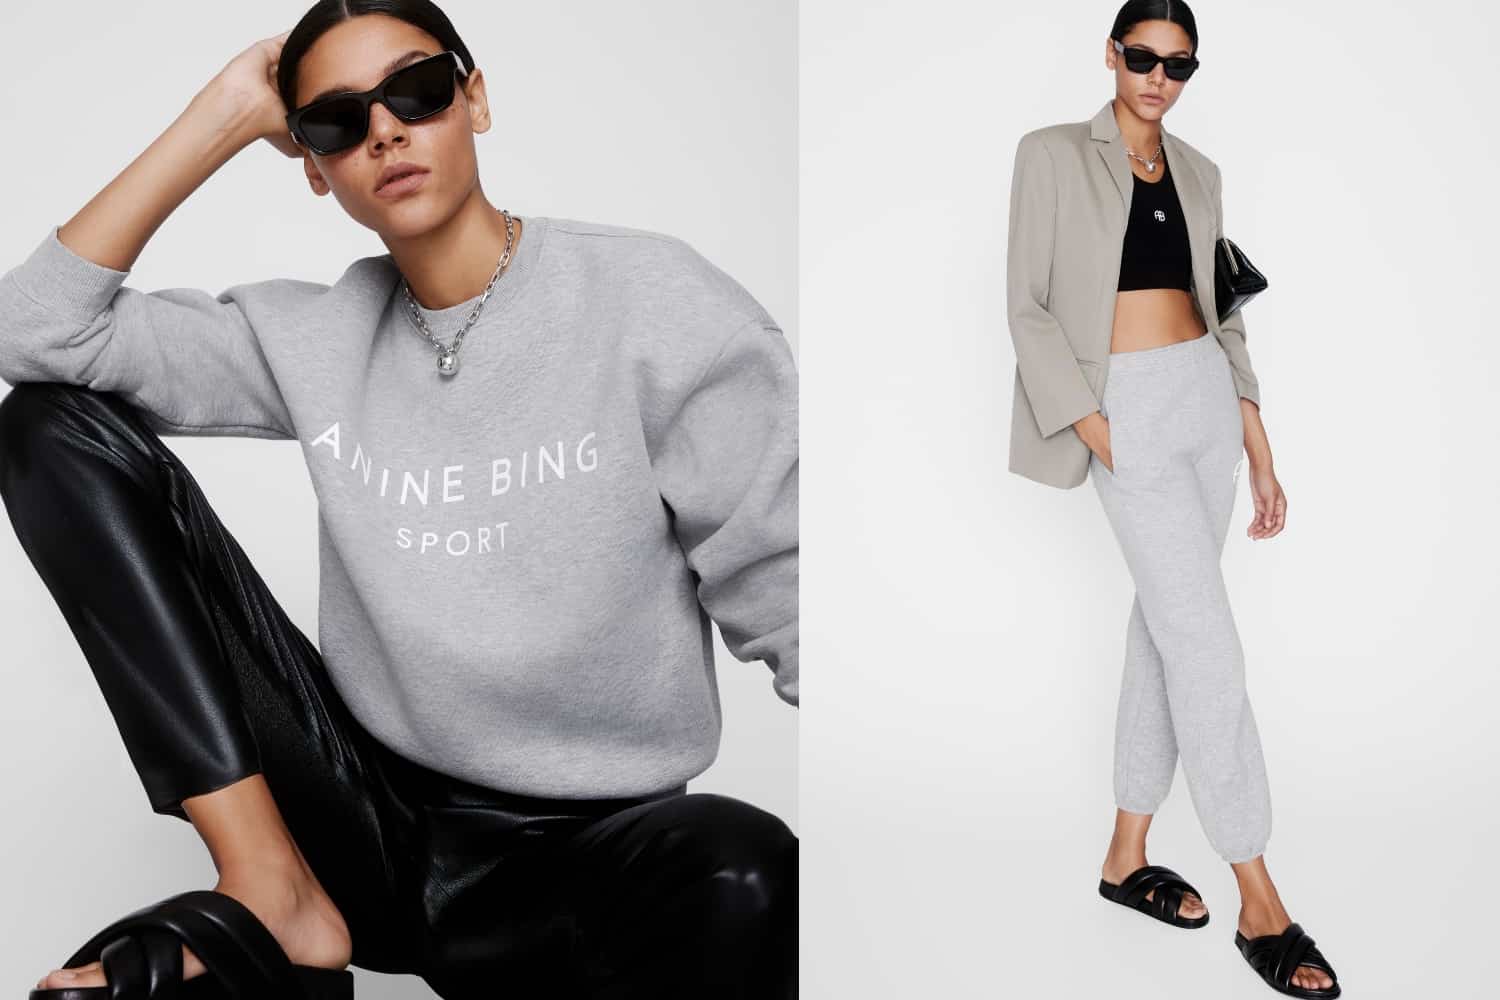 Want To Perfect A Supermodel Off-duty Look? Then You'll Love Anine